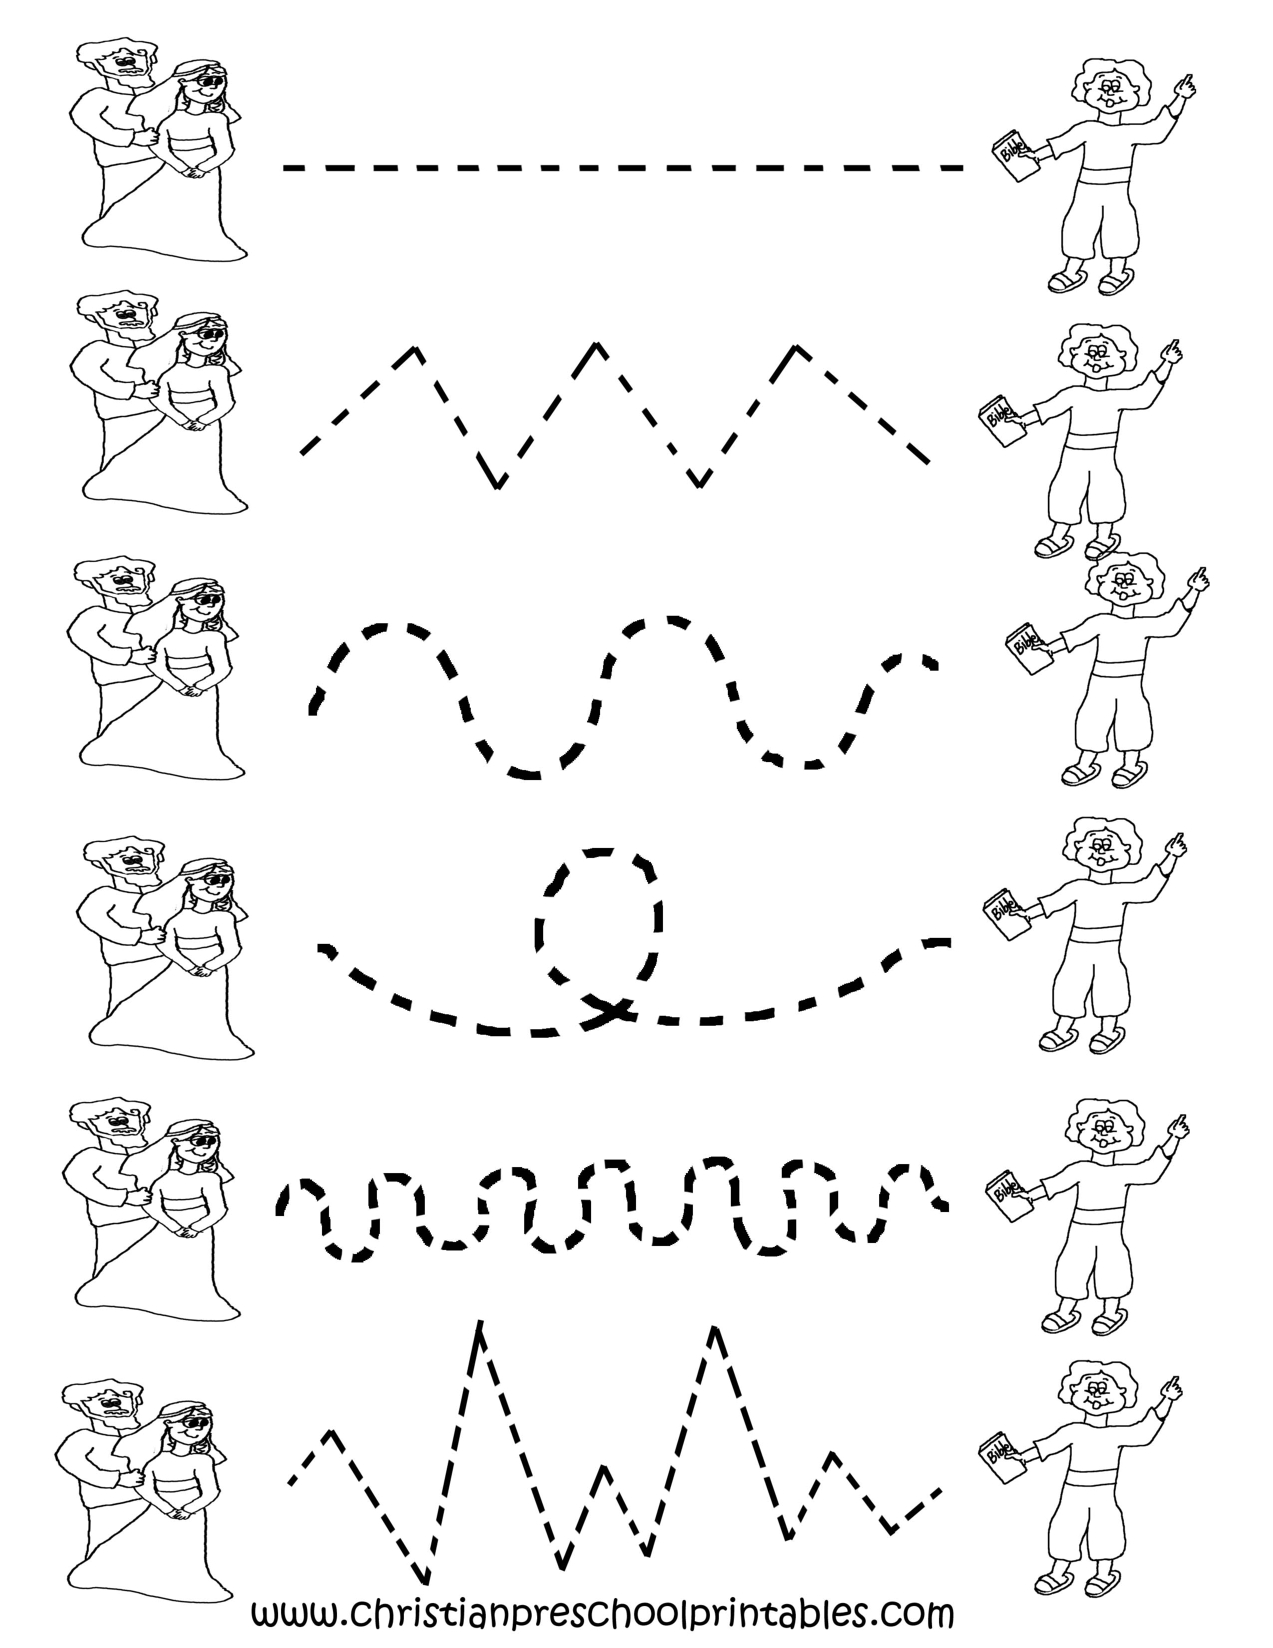 Image Detail For -Preschool Tracing Worksheets | Preschool Ideas - Free Printable Preschool Worksheets Tracing Lines